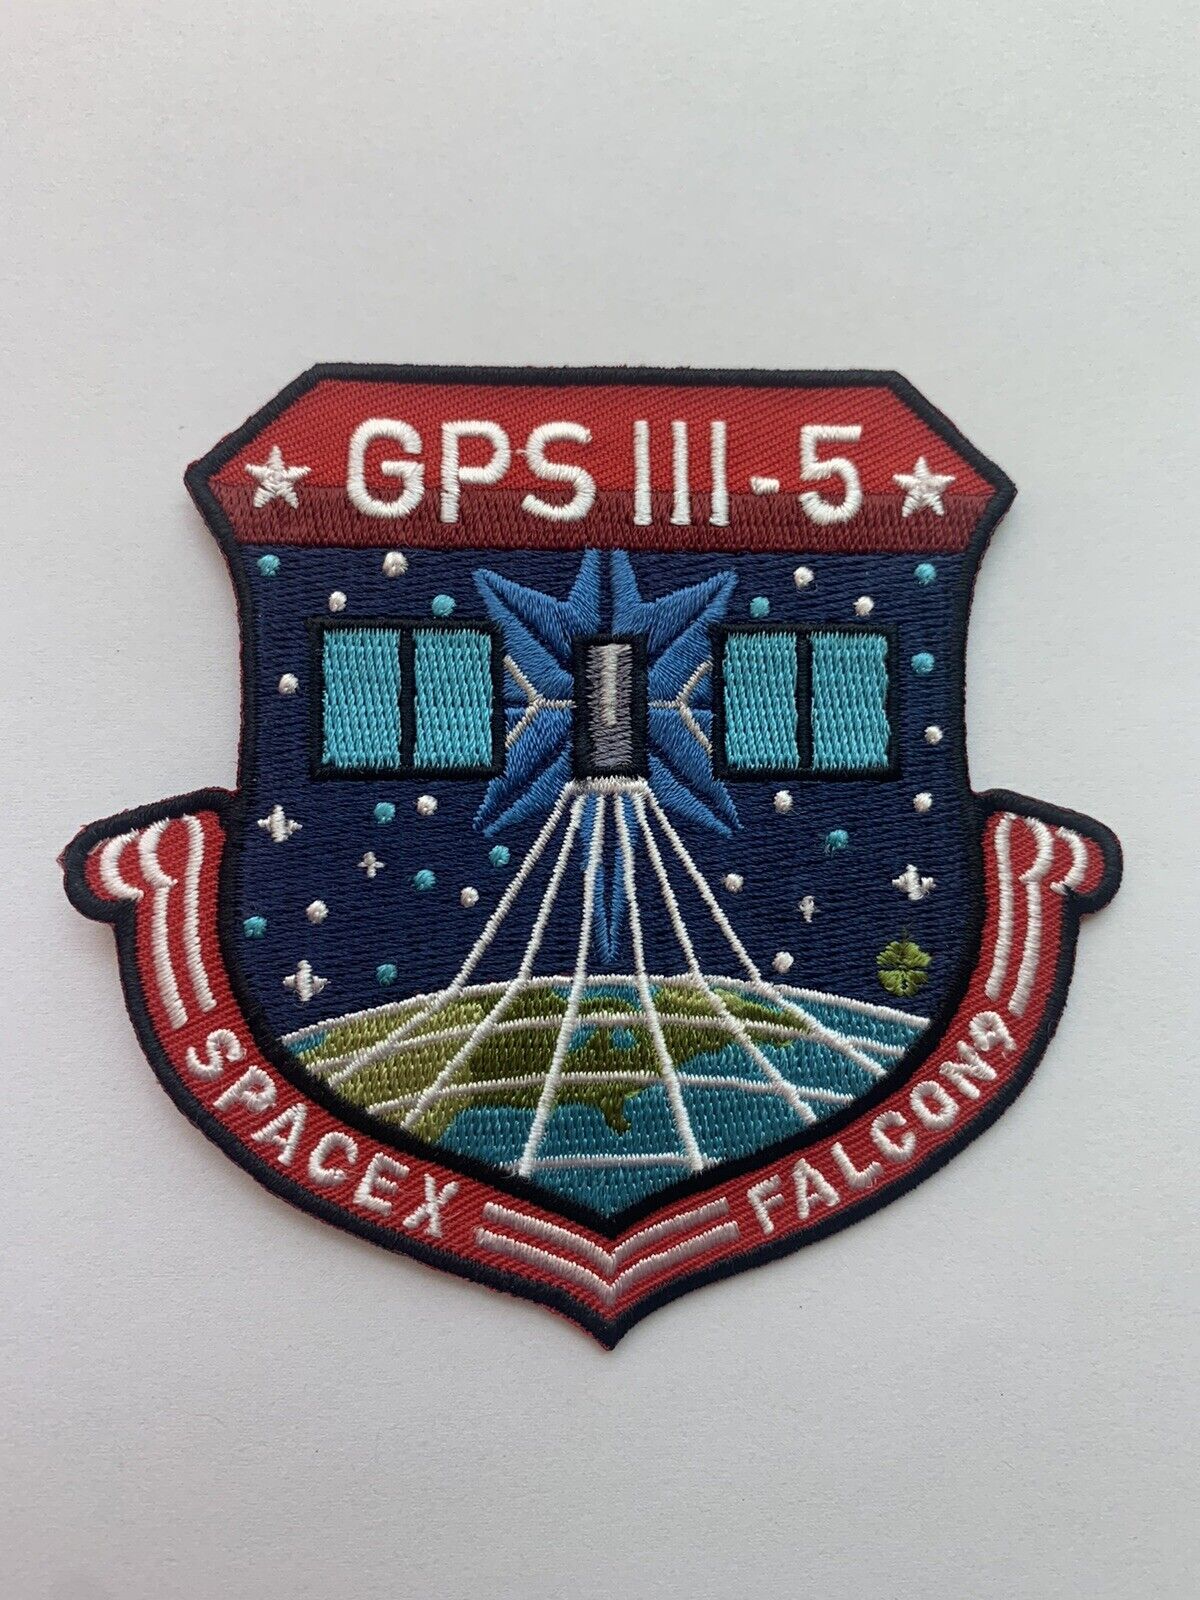 Original SpaceX GPS III 3 - 5 Falcon 9 Mission Patch NASA 2021  3.5”